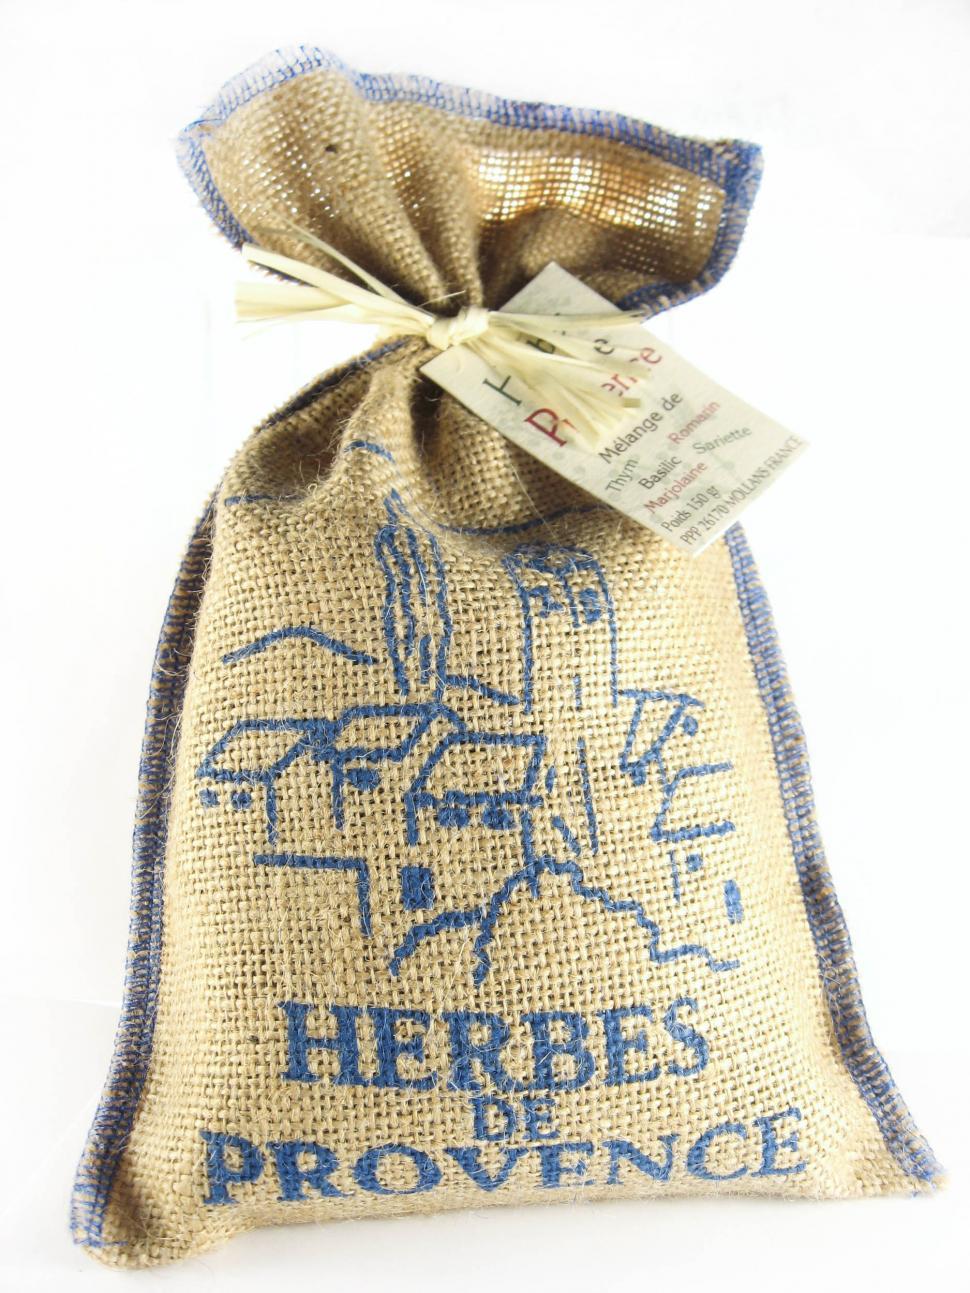 Free Image of Bag of Herbs from Provance 